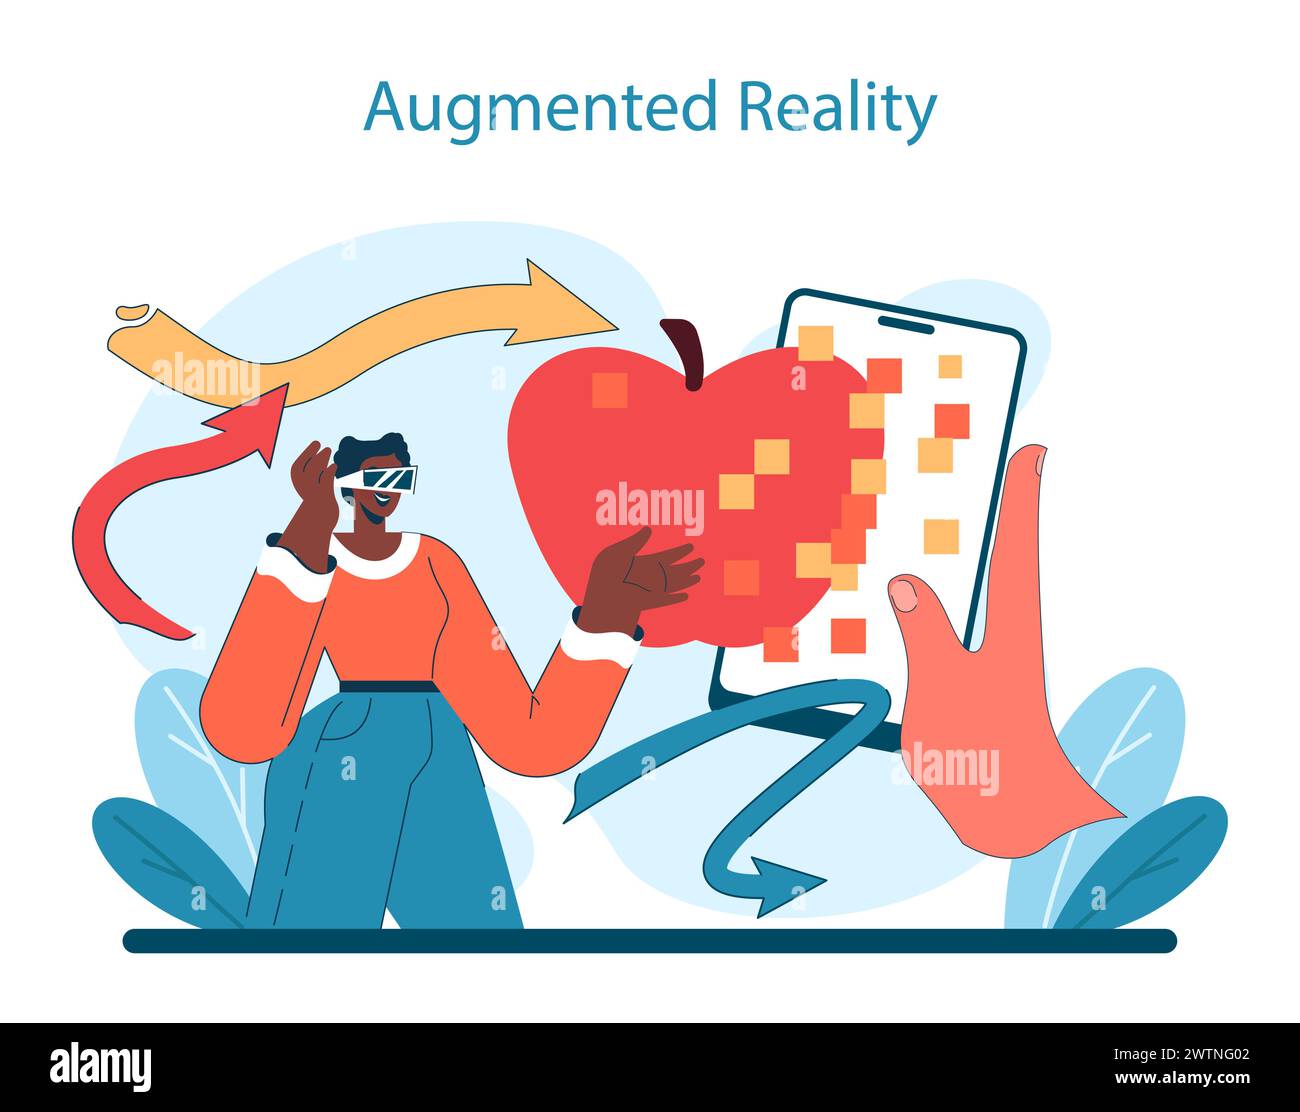 Augmented Reality innovation. A user interacts with a digital apple through AR, blending the physical and virtual for an educational experience. Vector illustration. Stock Vector